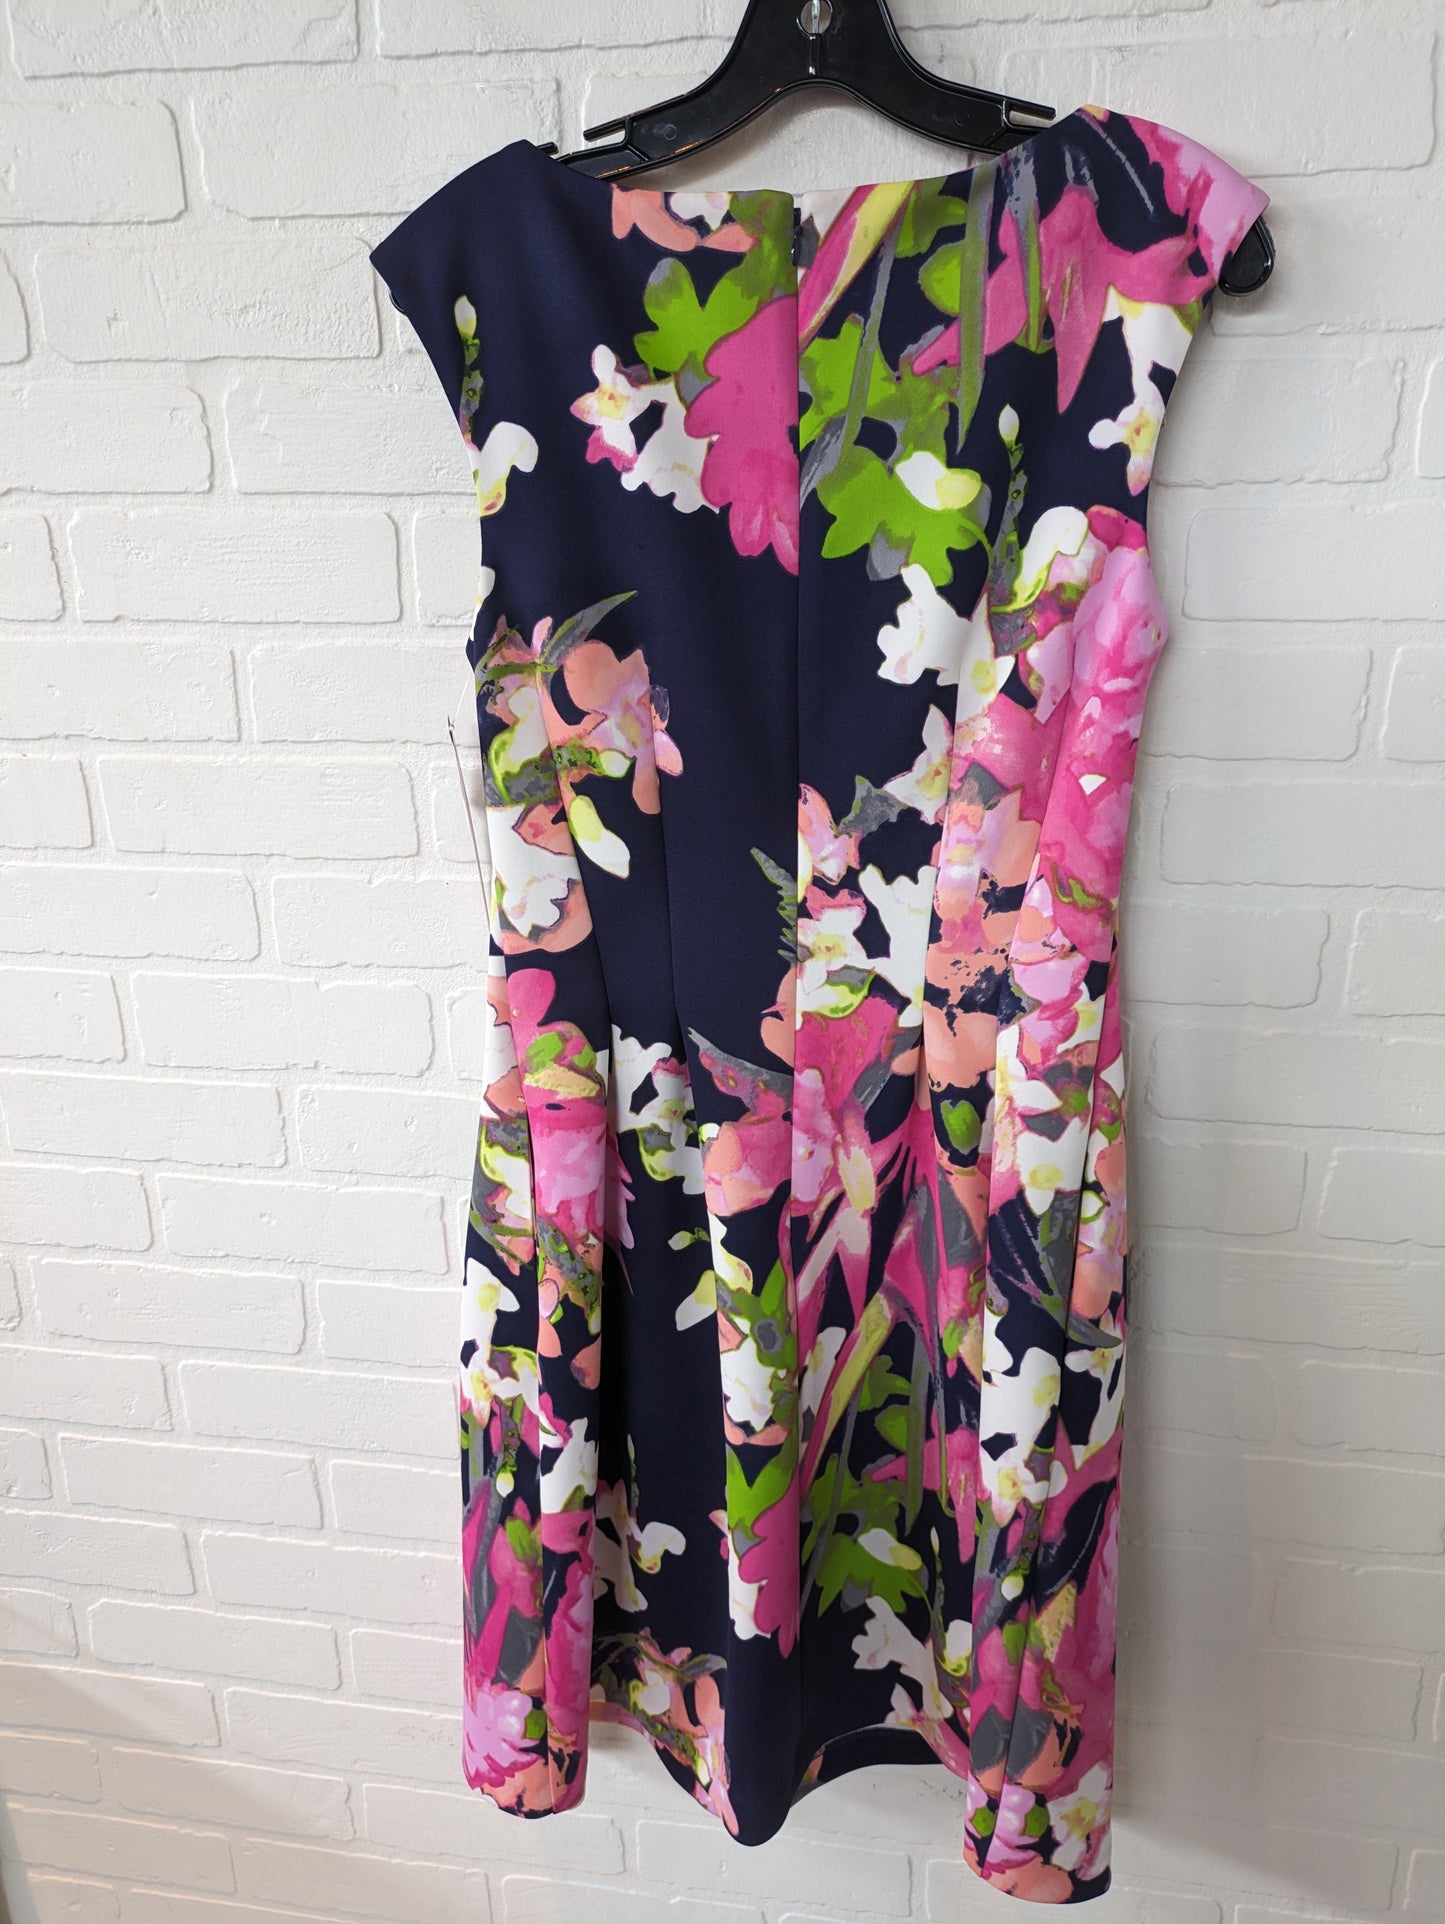 Dress Party Midi By Vince Camuto  Size: M